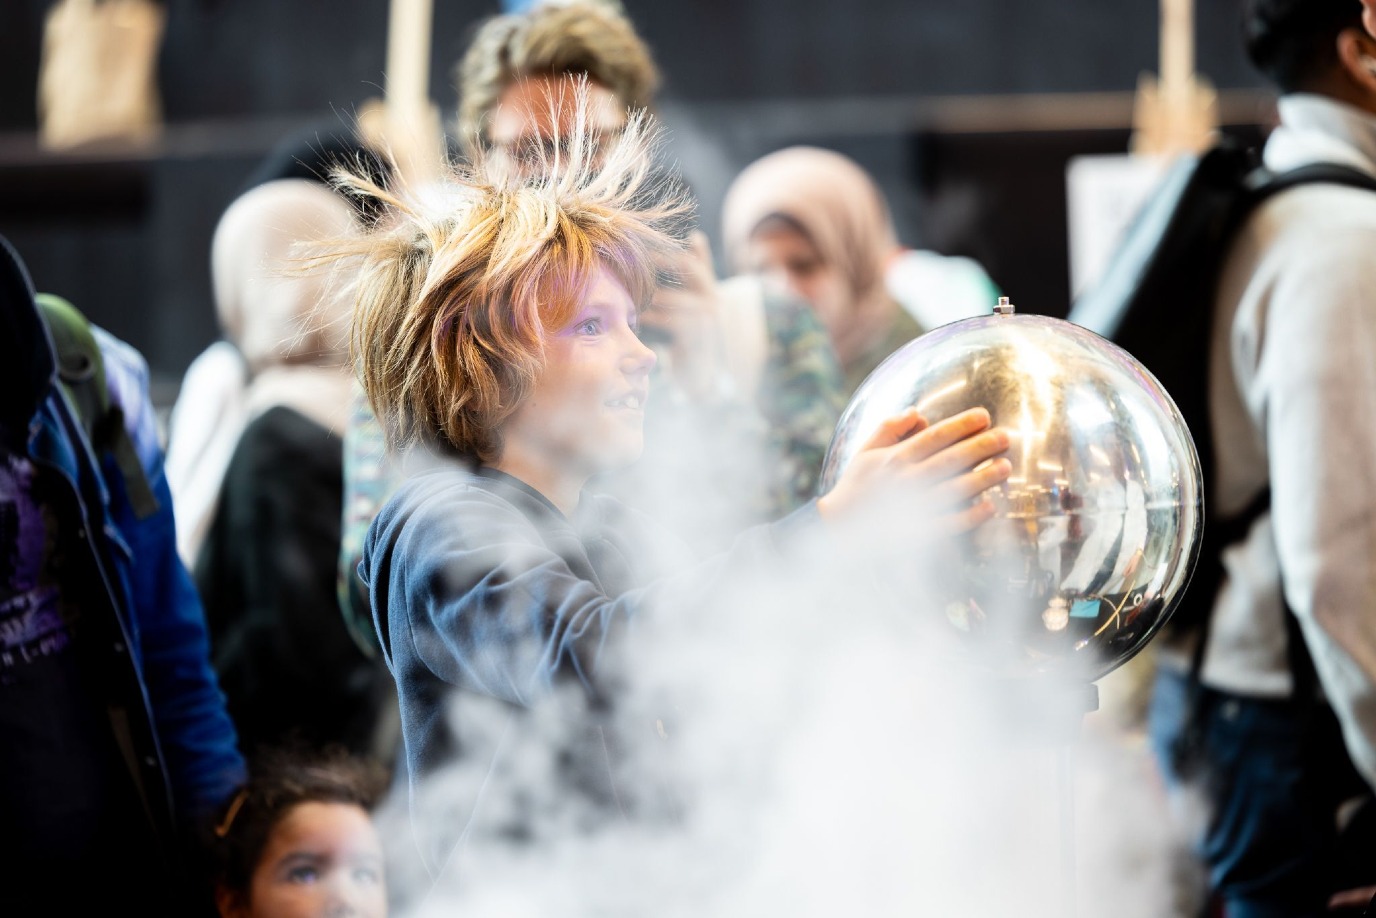 Wanted: Enthusiastic volunteers for science festivals in Groningen!